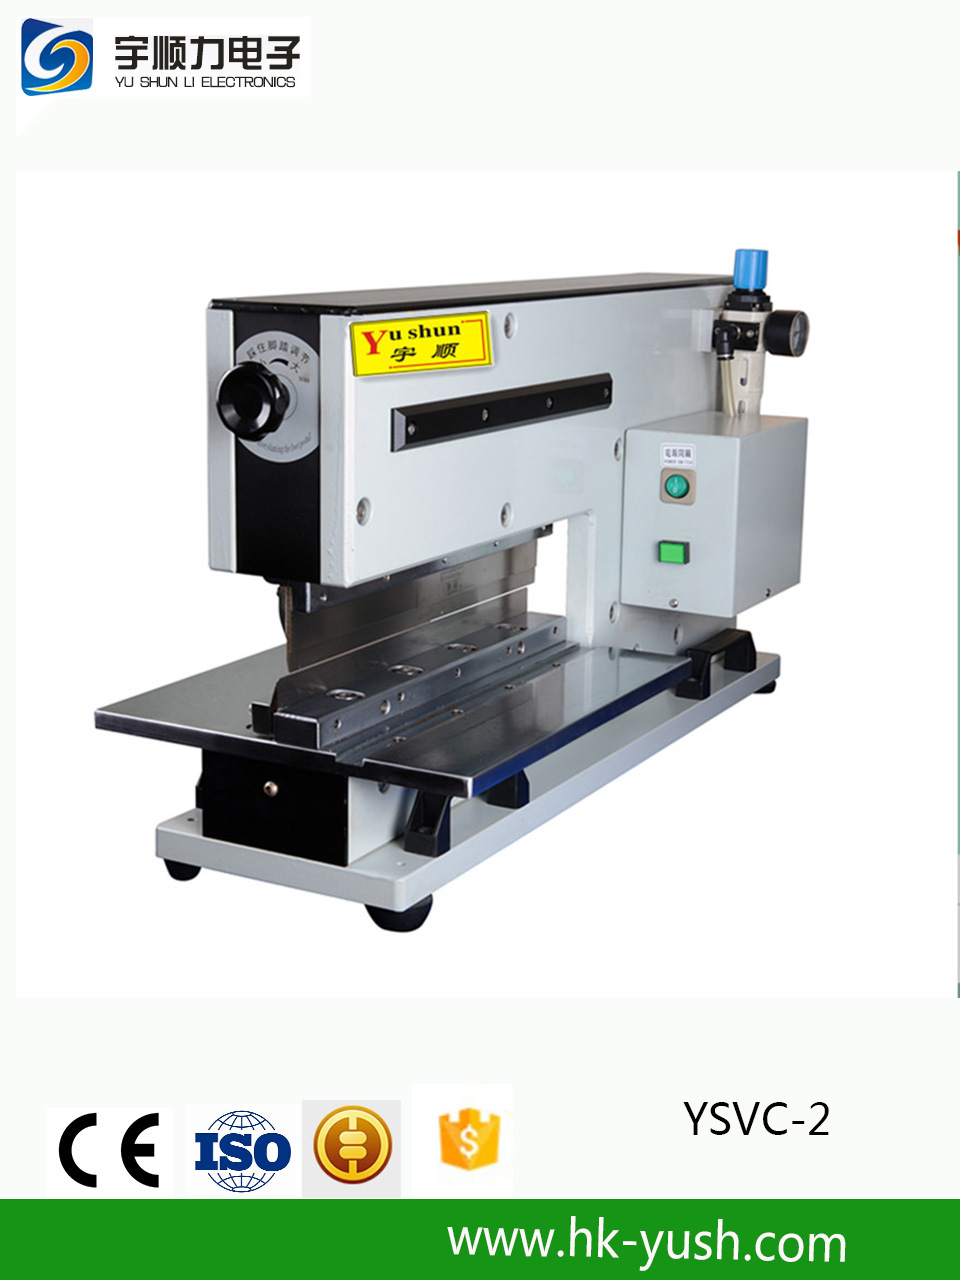 Depanel PCB YSVC-2 Maestro 4m Depanel Meaning For One Year Warranty 